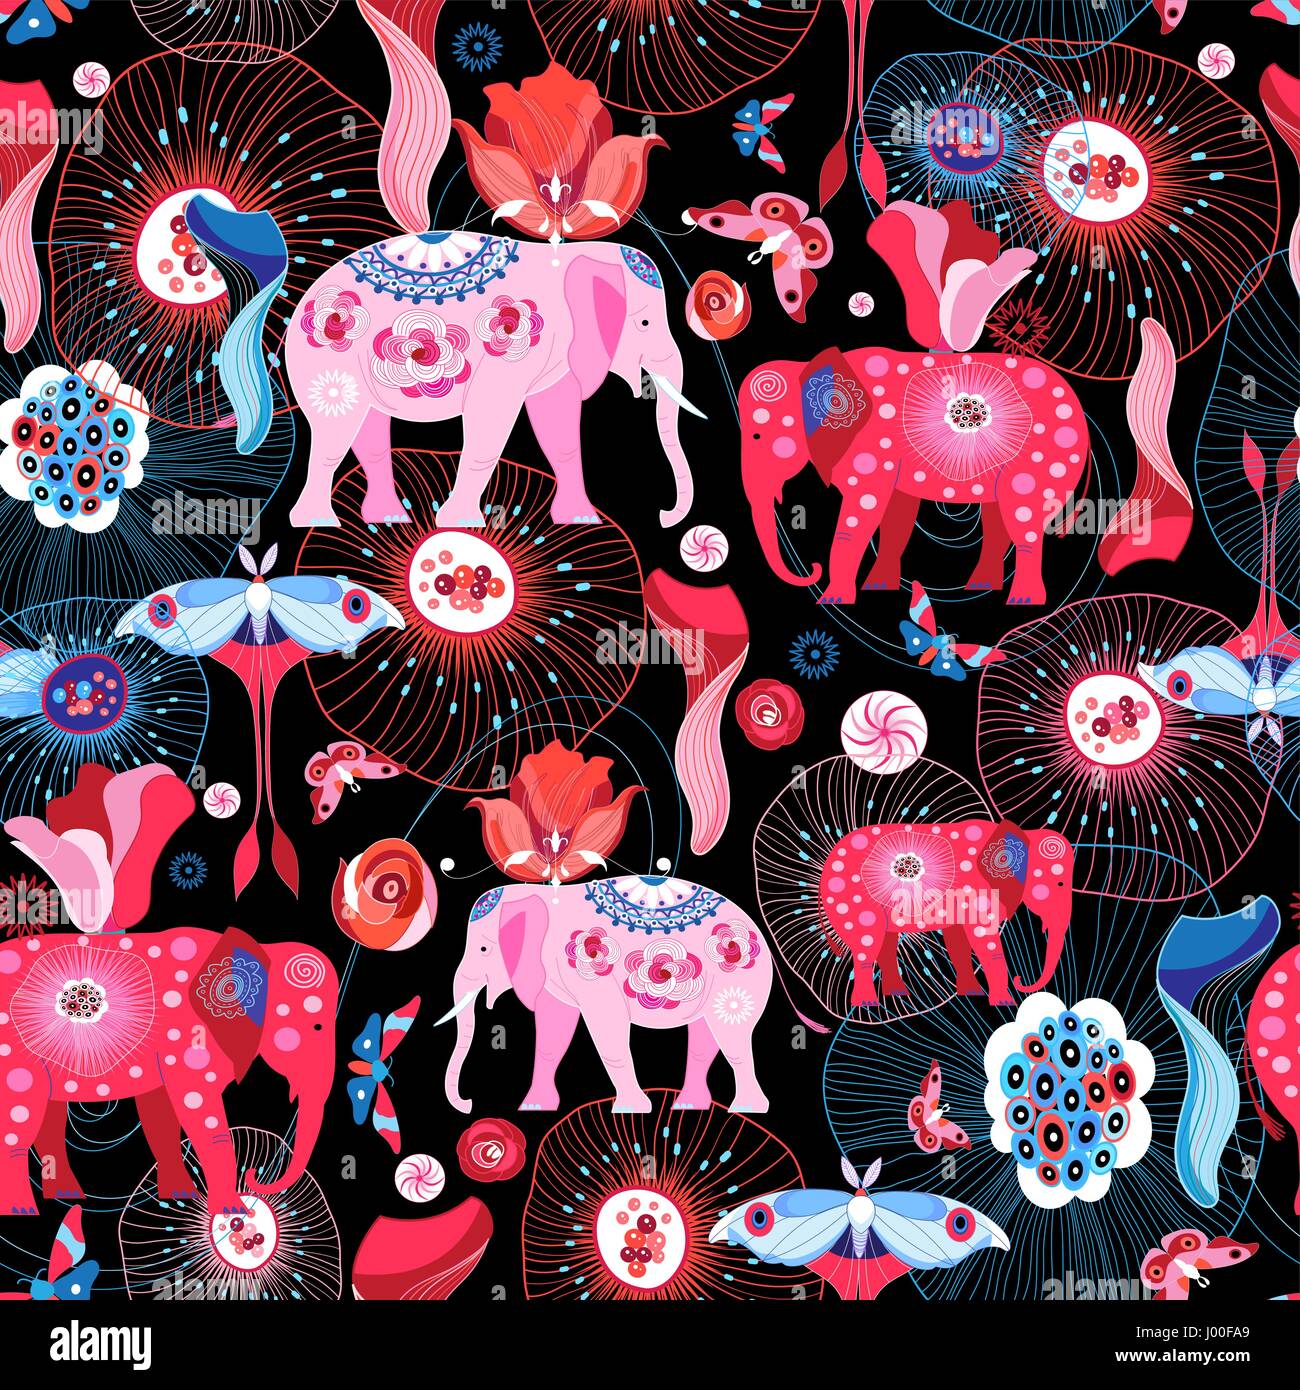 Seamless efthasis pattern with pink elephants and butterflies Stock Vector